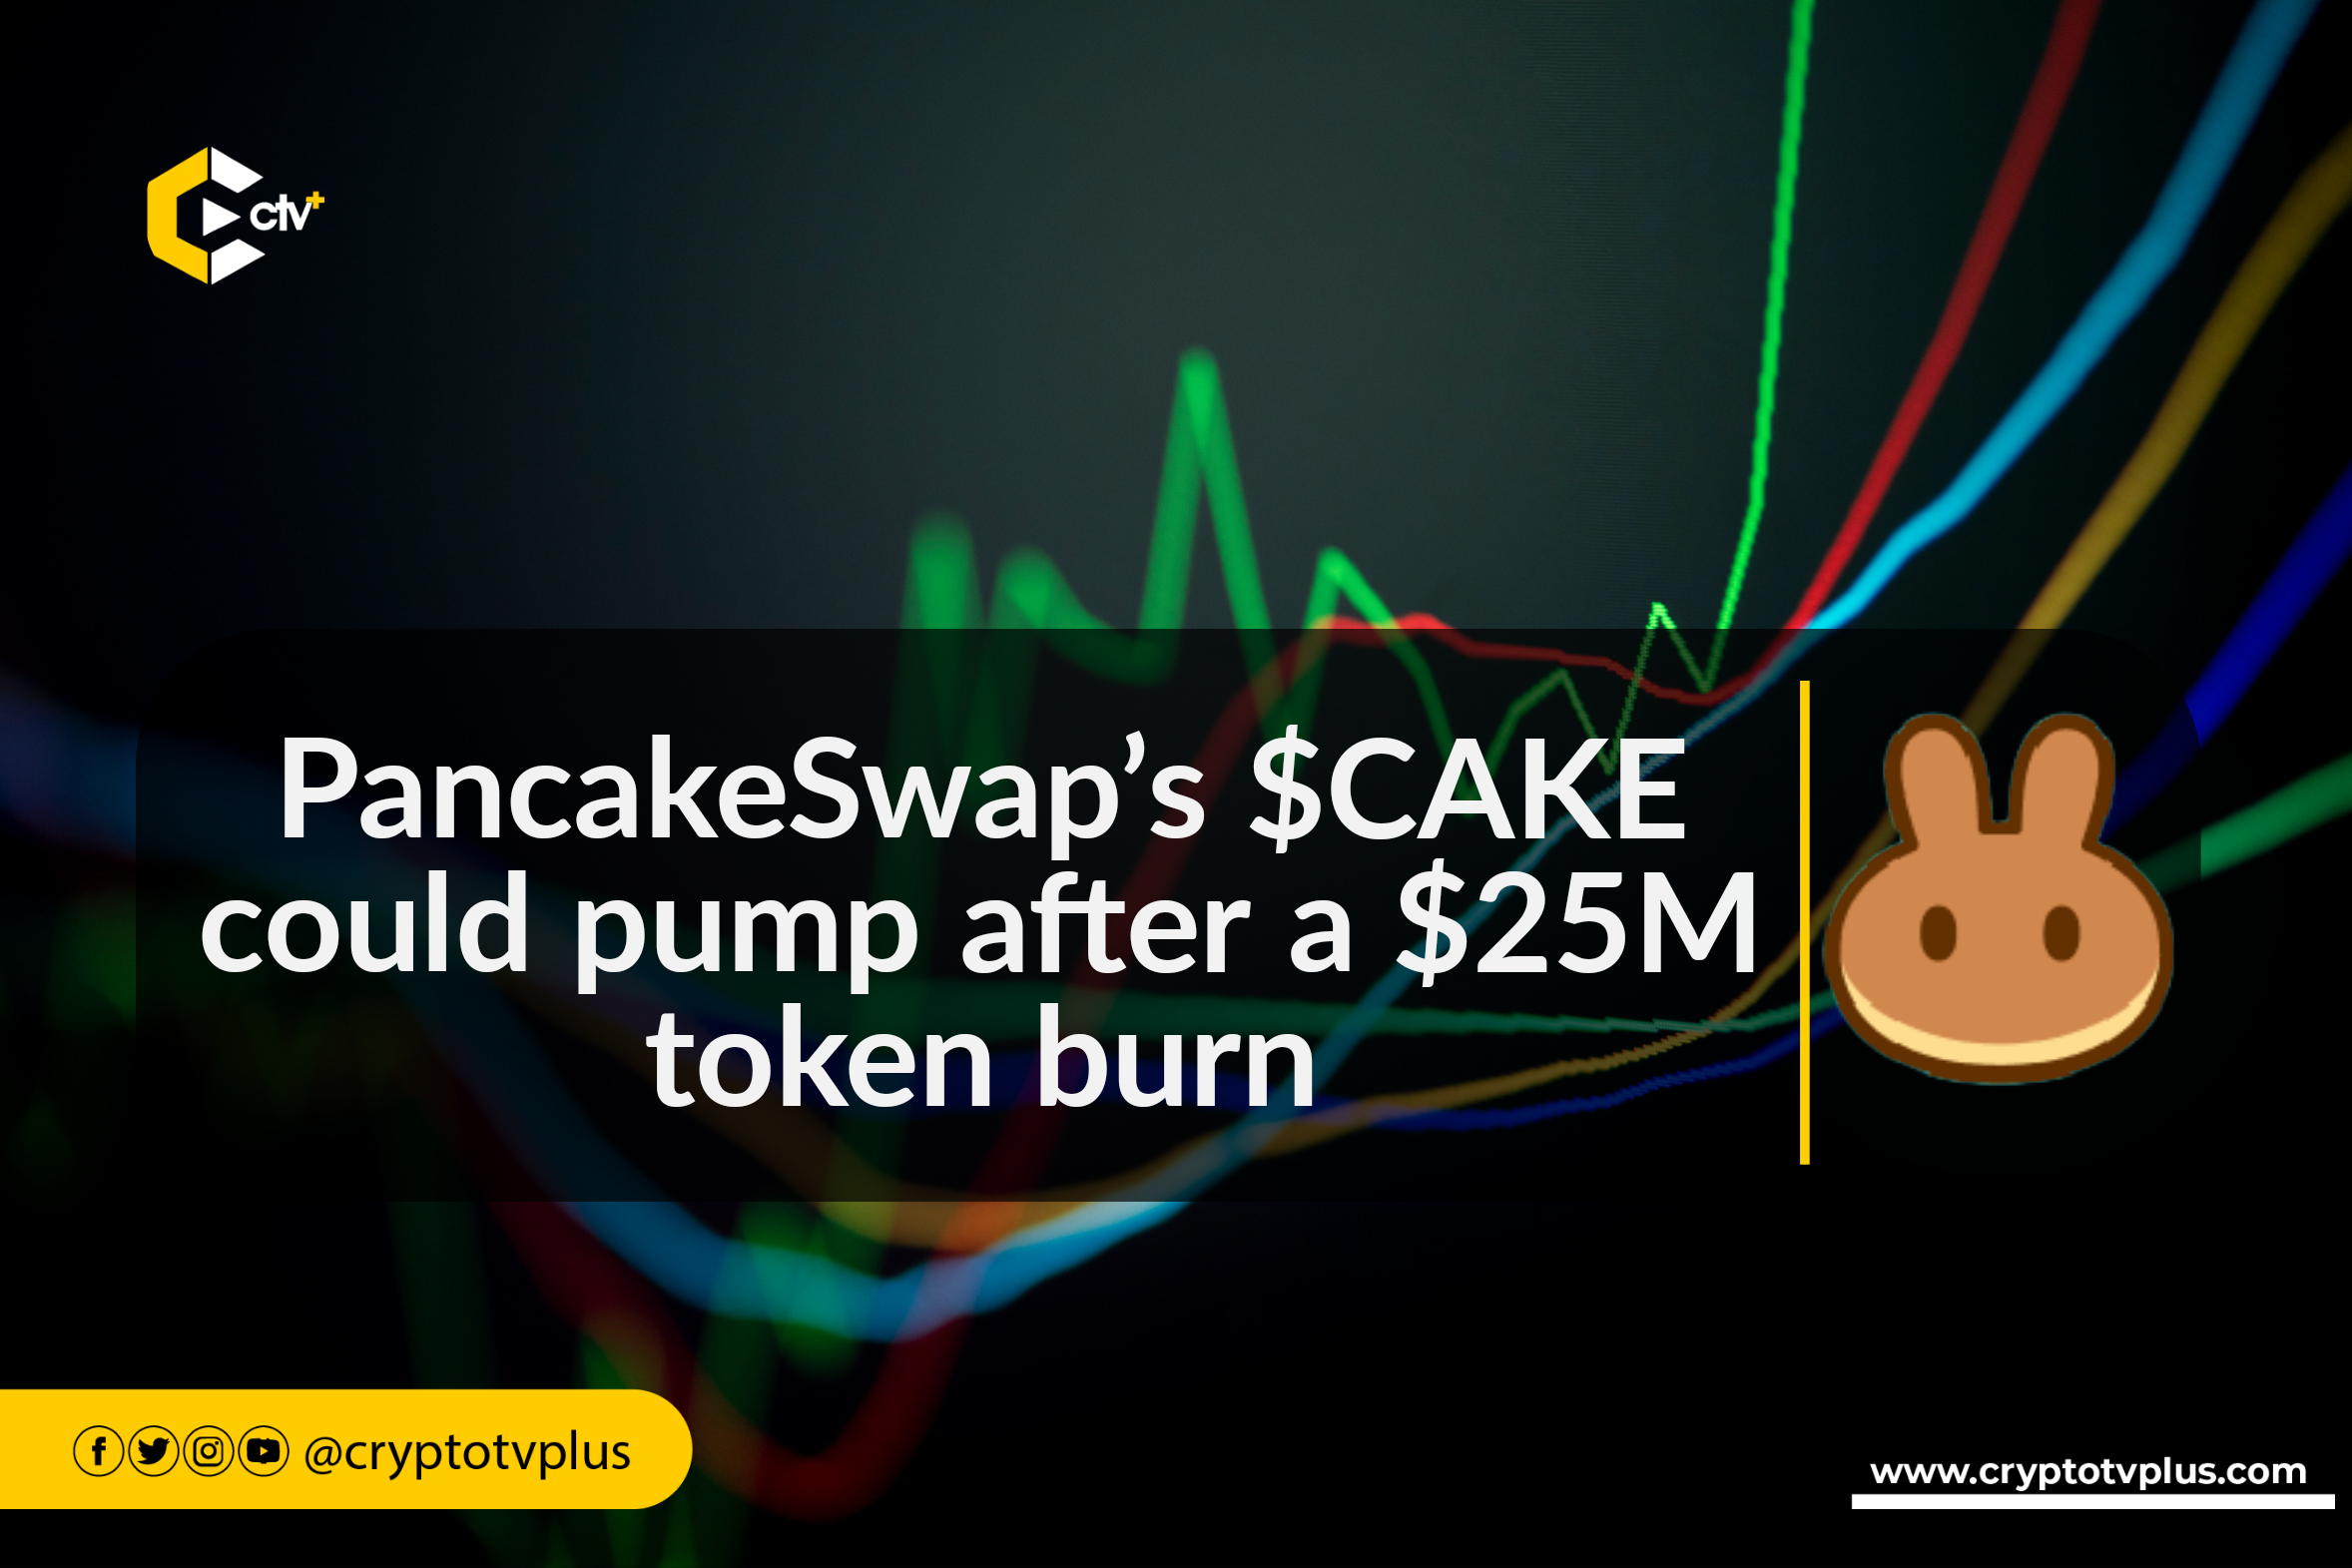 PancakeSwap executes strategic token burn, removing 8.7M CAKE tokens worth $25M. Could this spur a token pump?